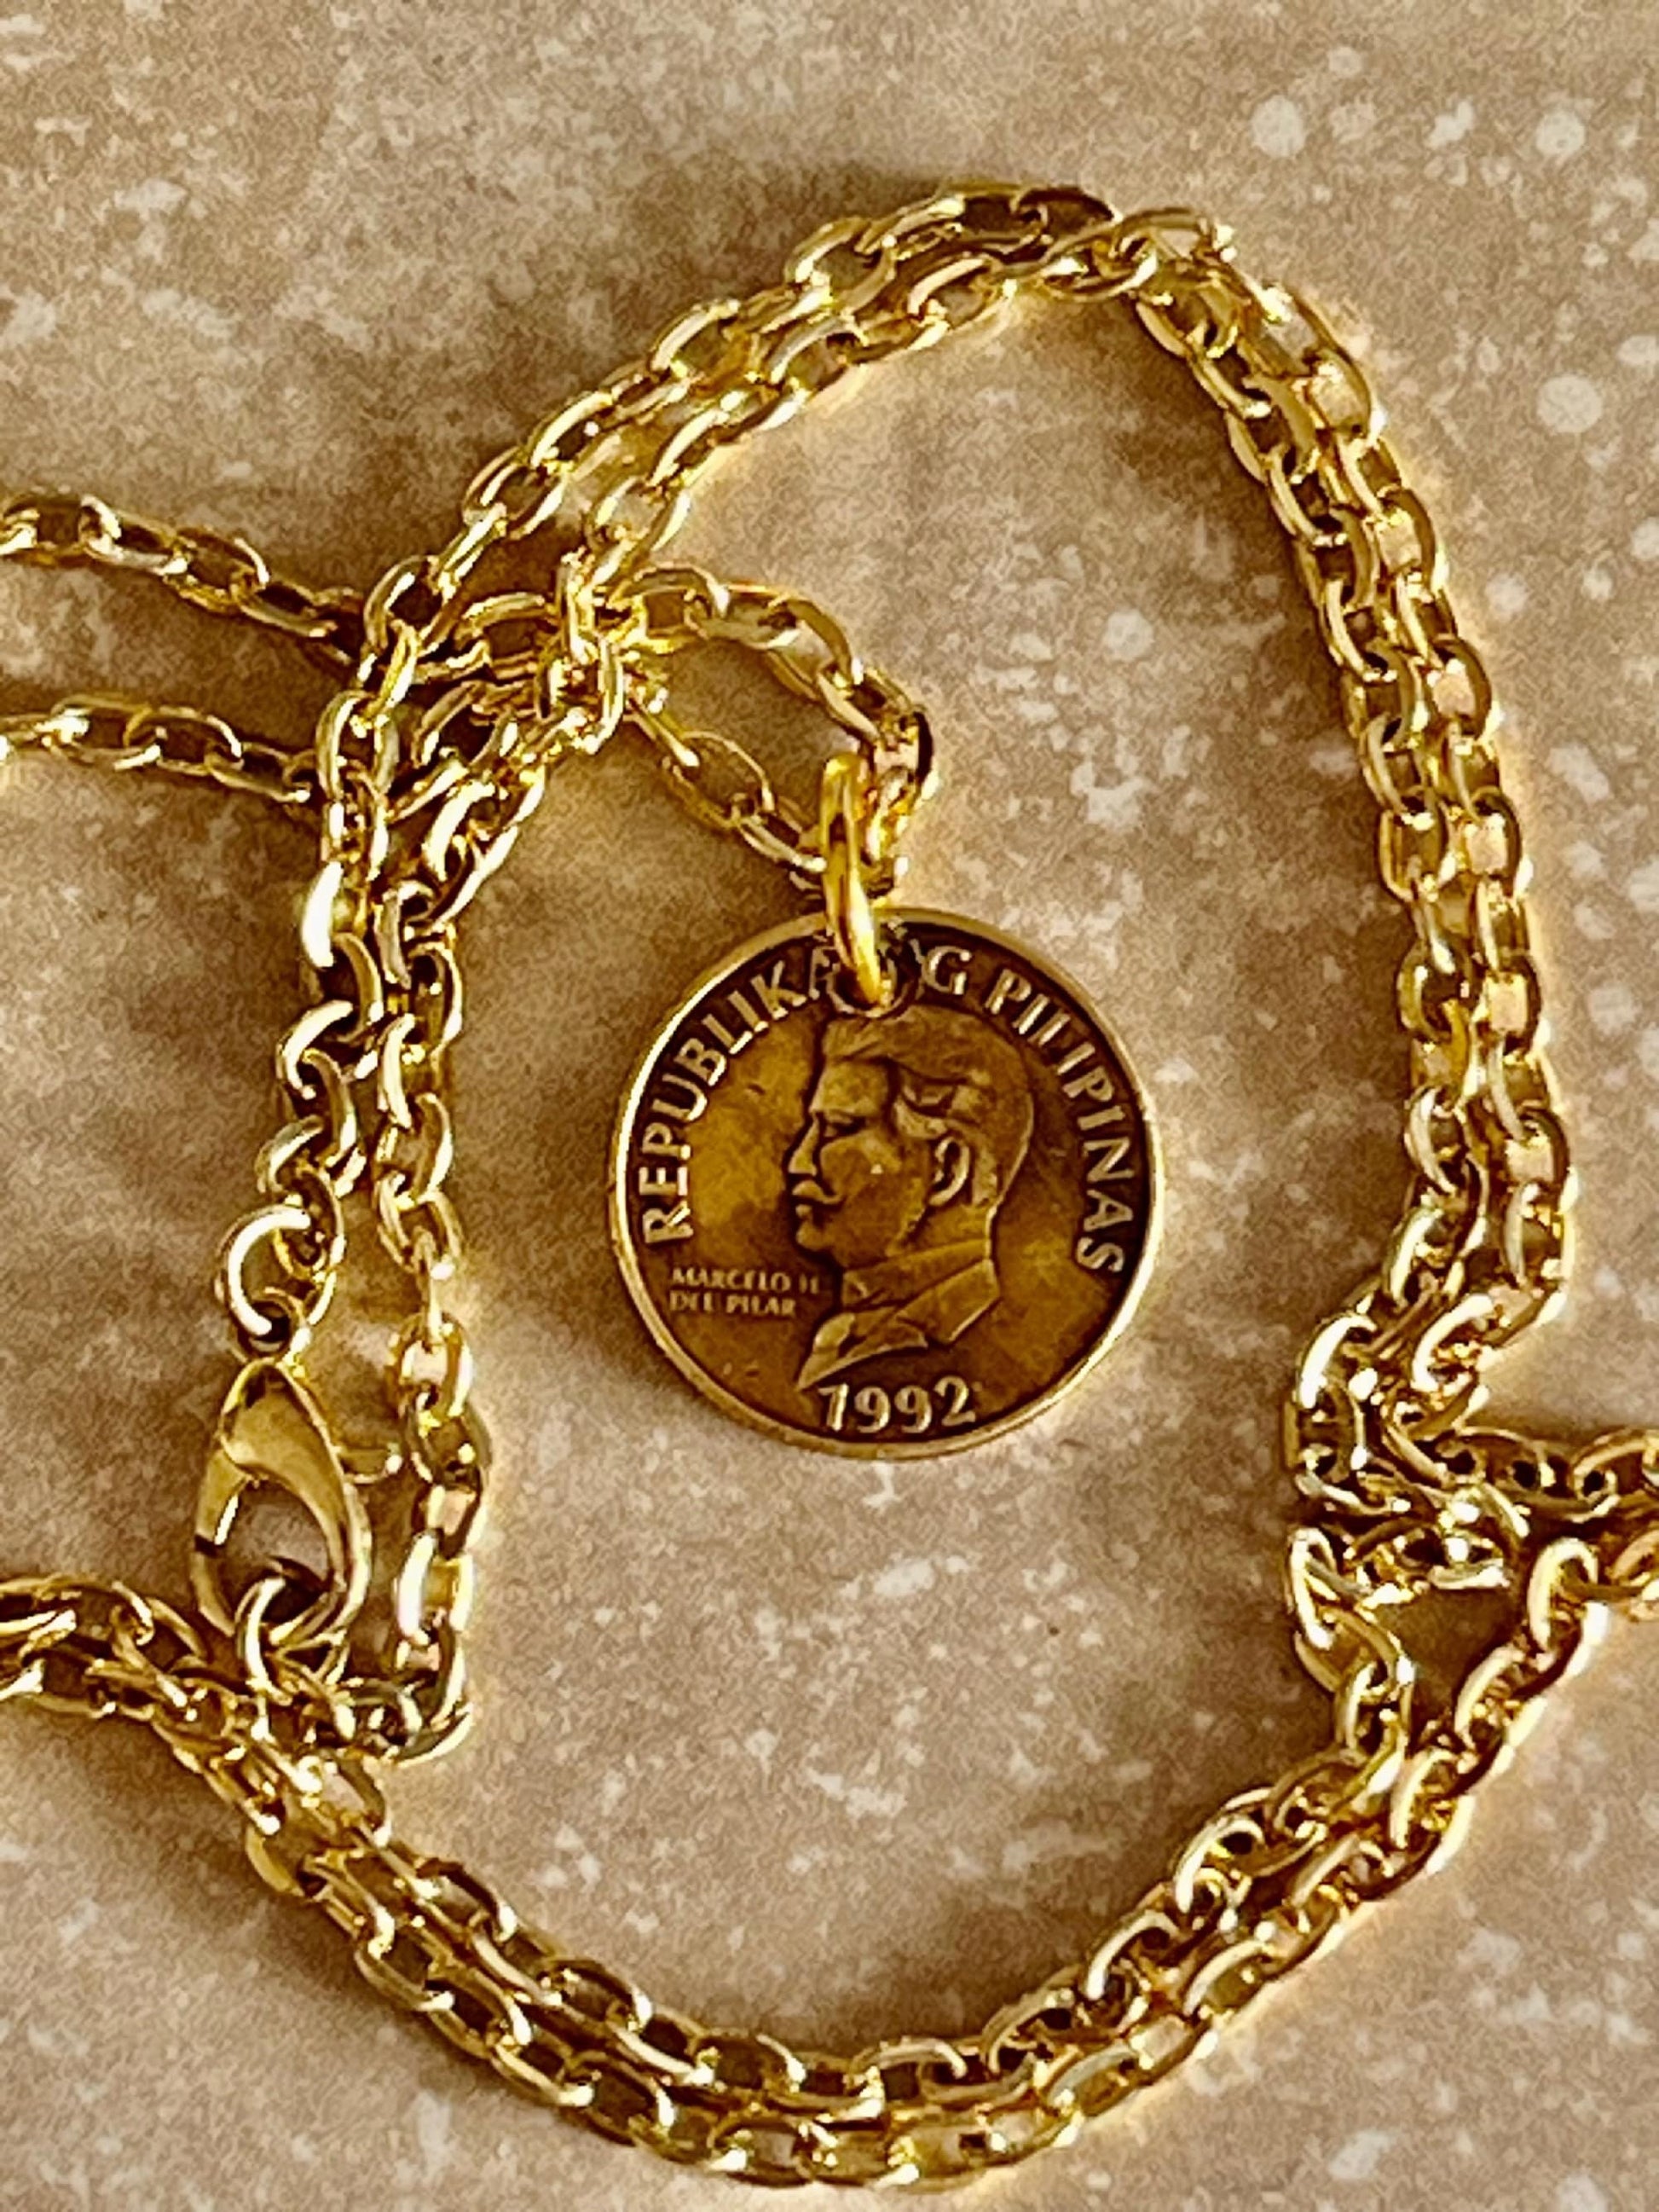 Philippines Coin Pendant Necklace Pilipinas 50 Sentimo Personal Vintage Handmade Jewelry Gift Friend Charm For Him Her World Coin Collector